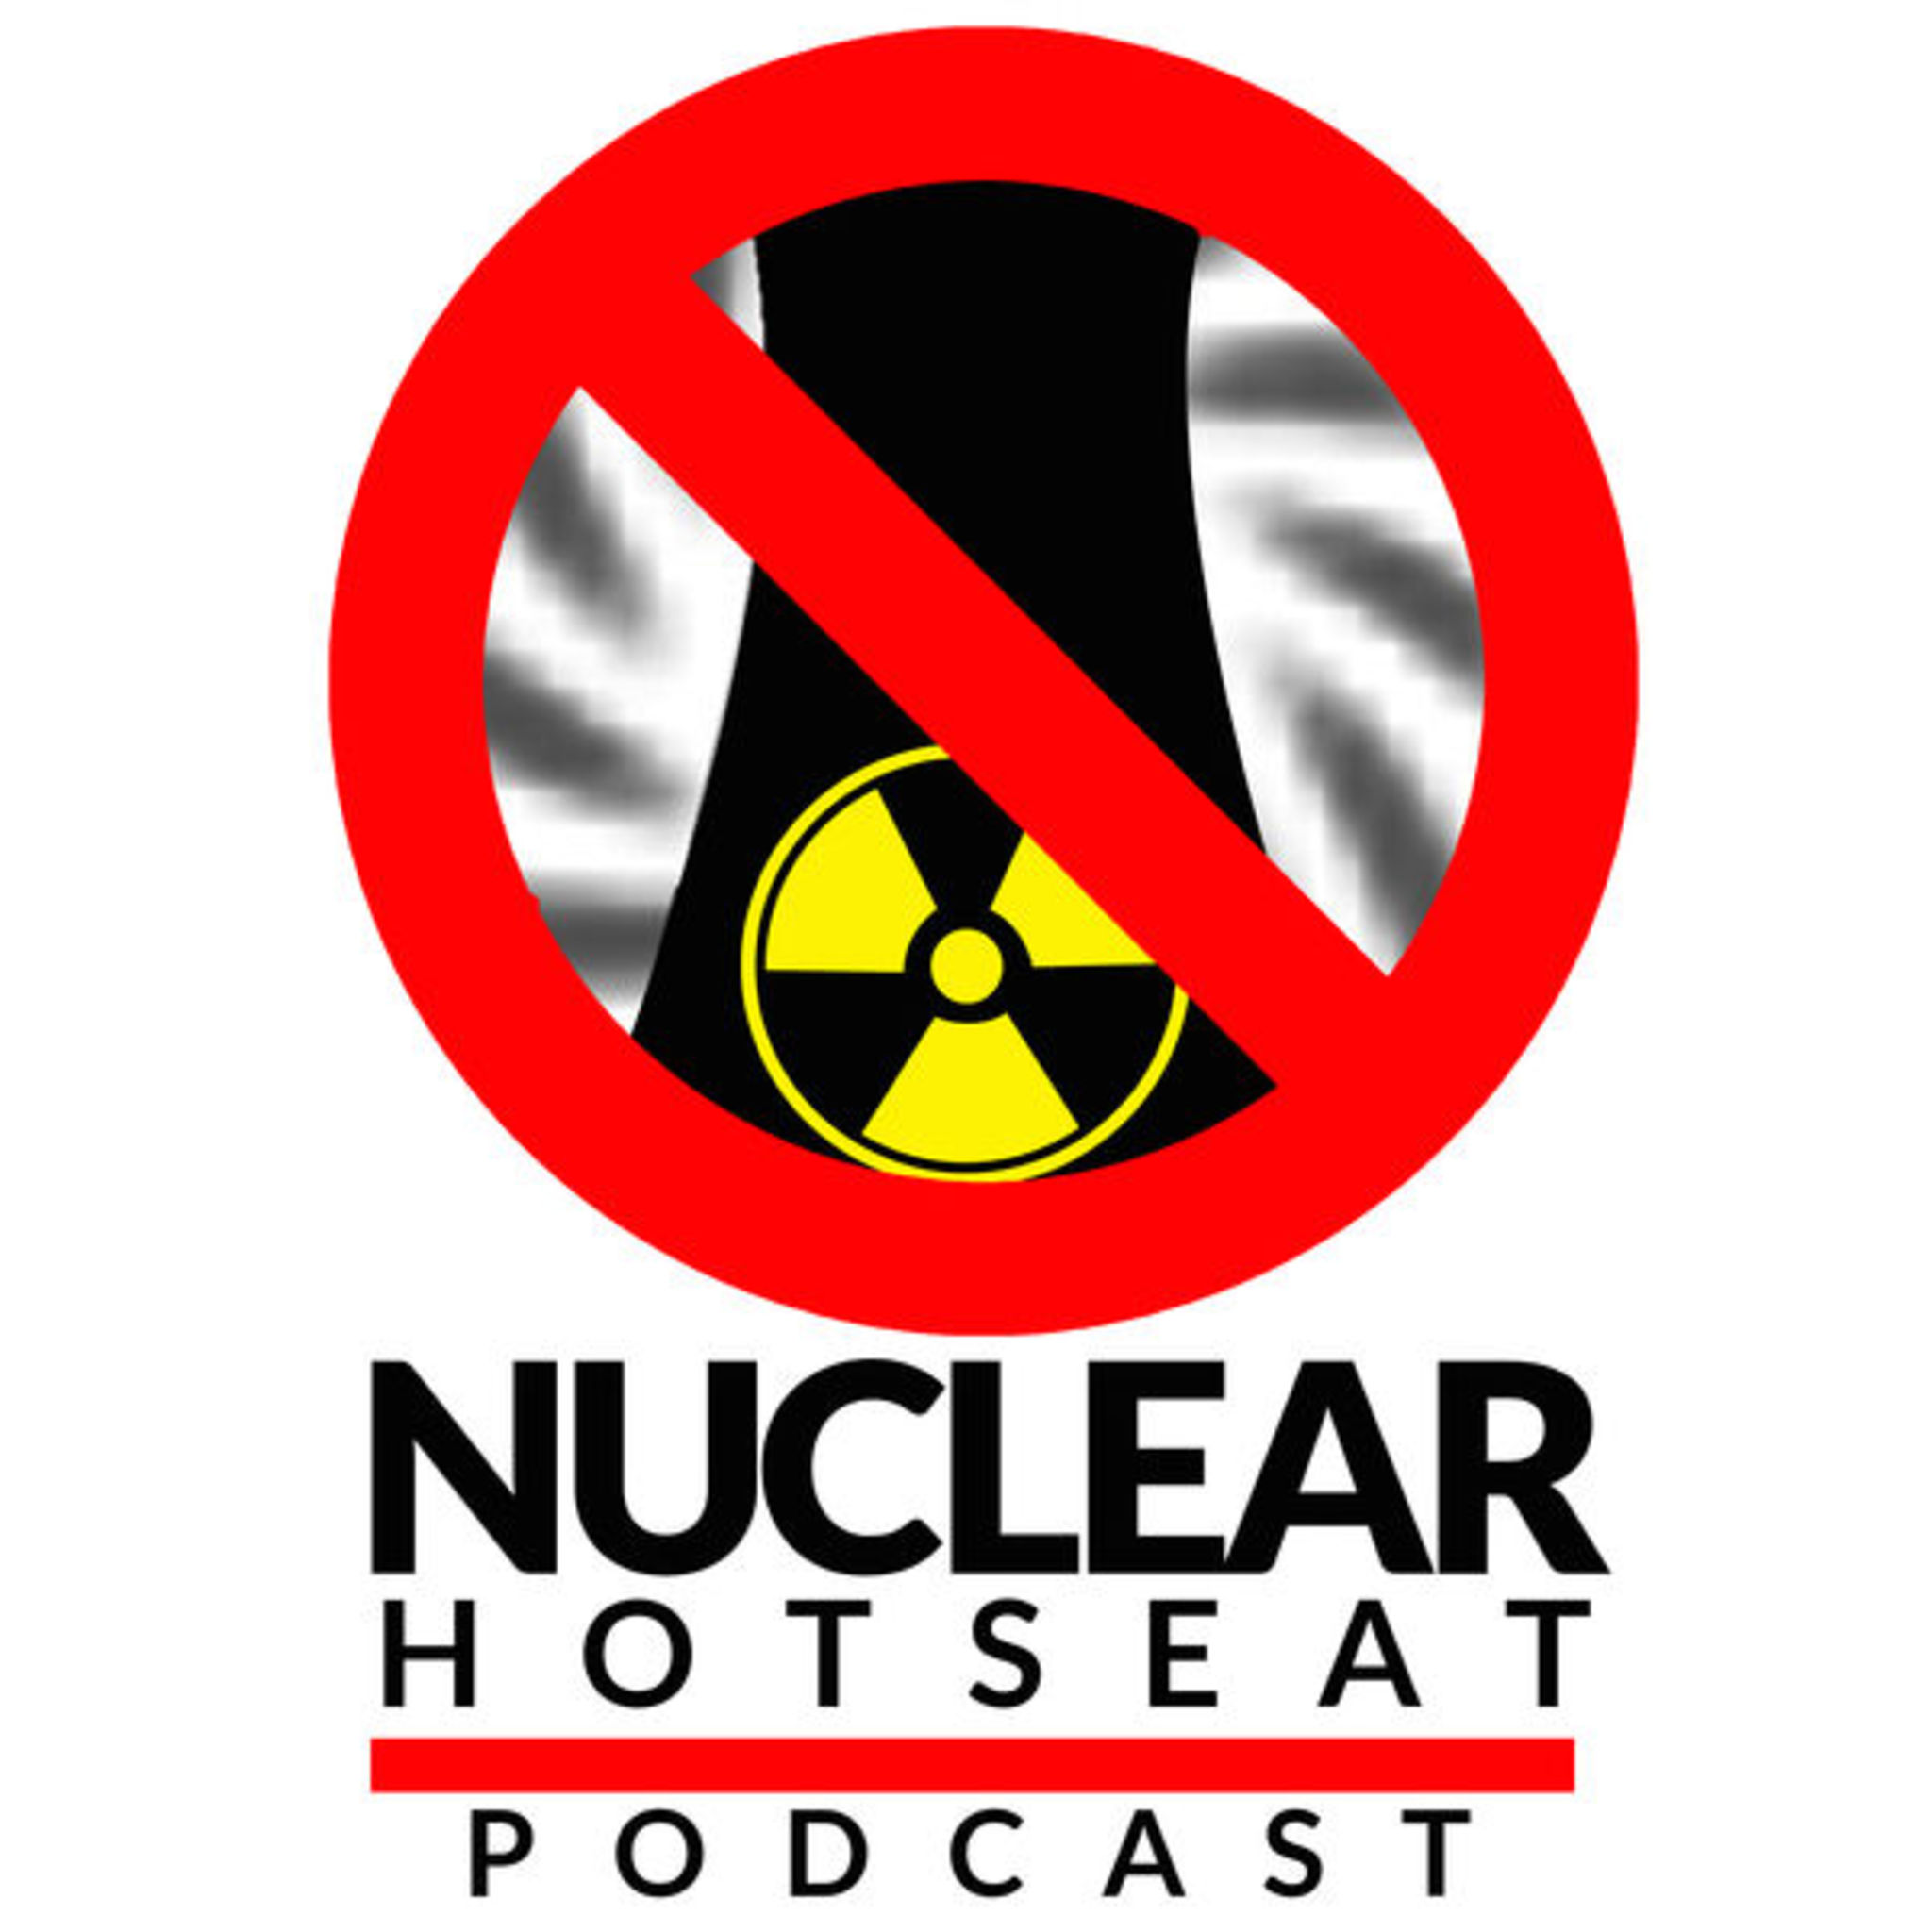 Nuclear Hotseat hosted by Libbe HaLevy